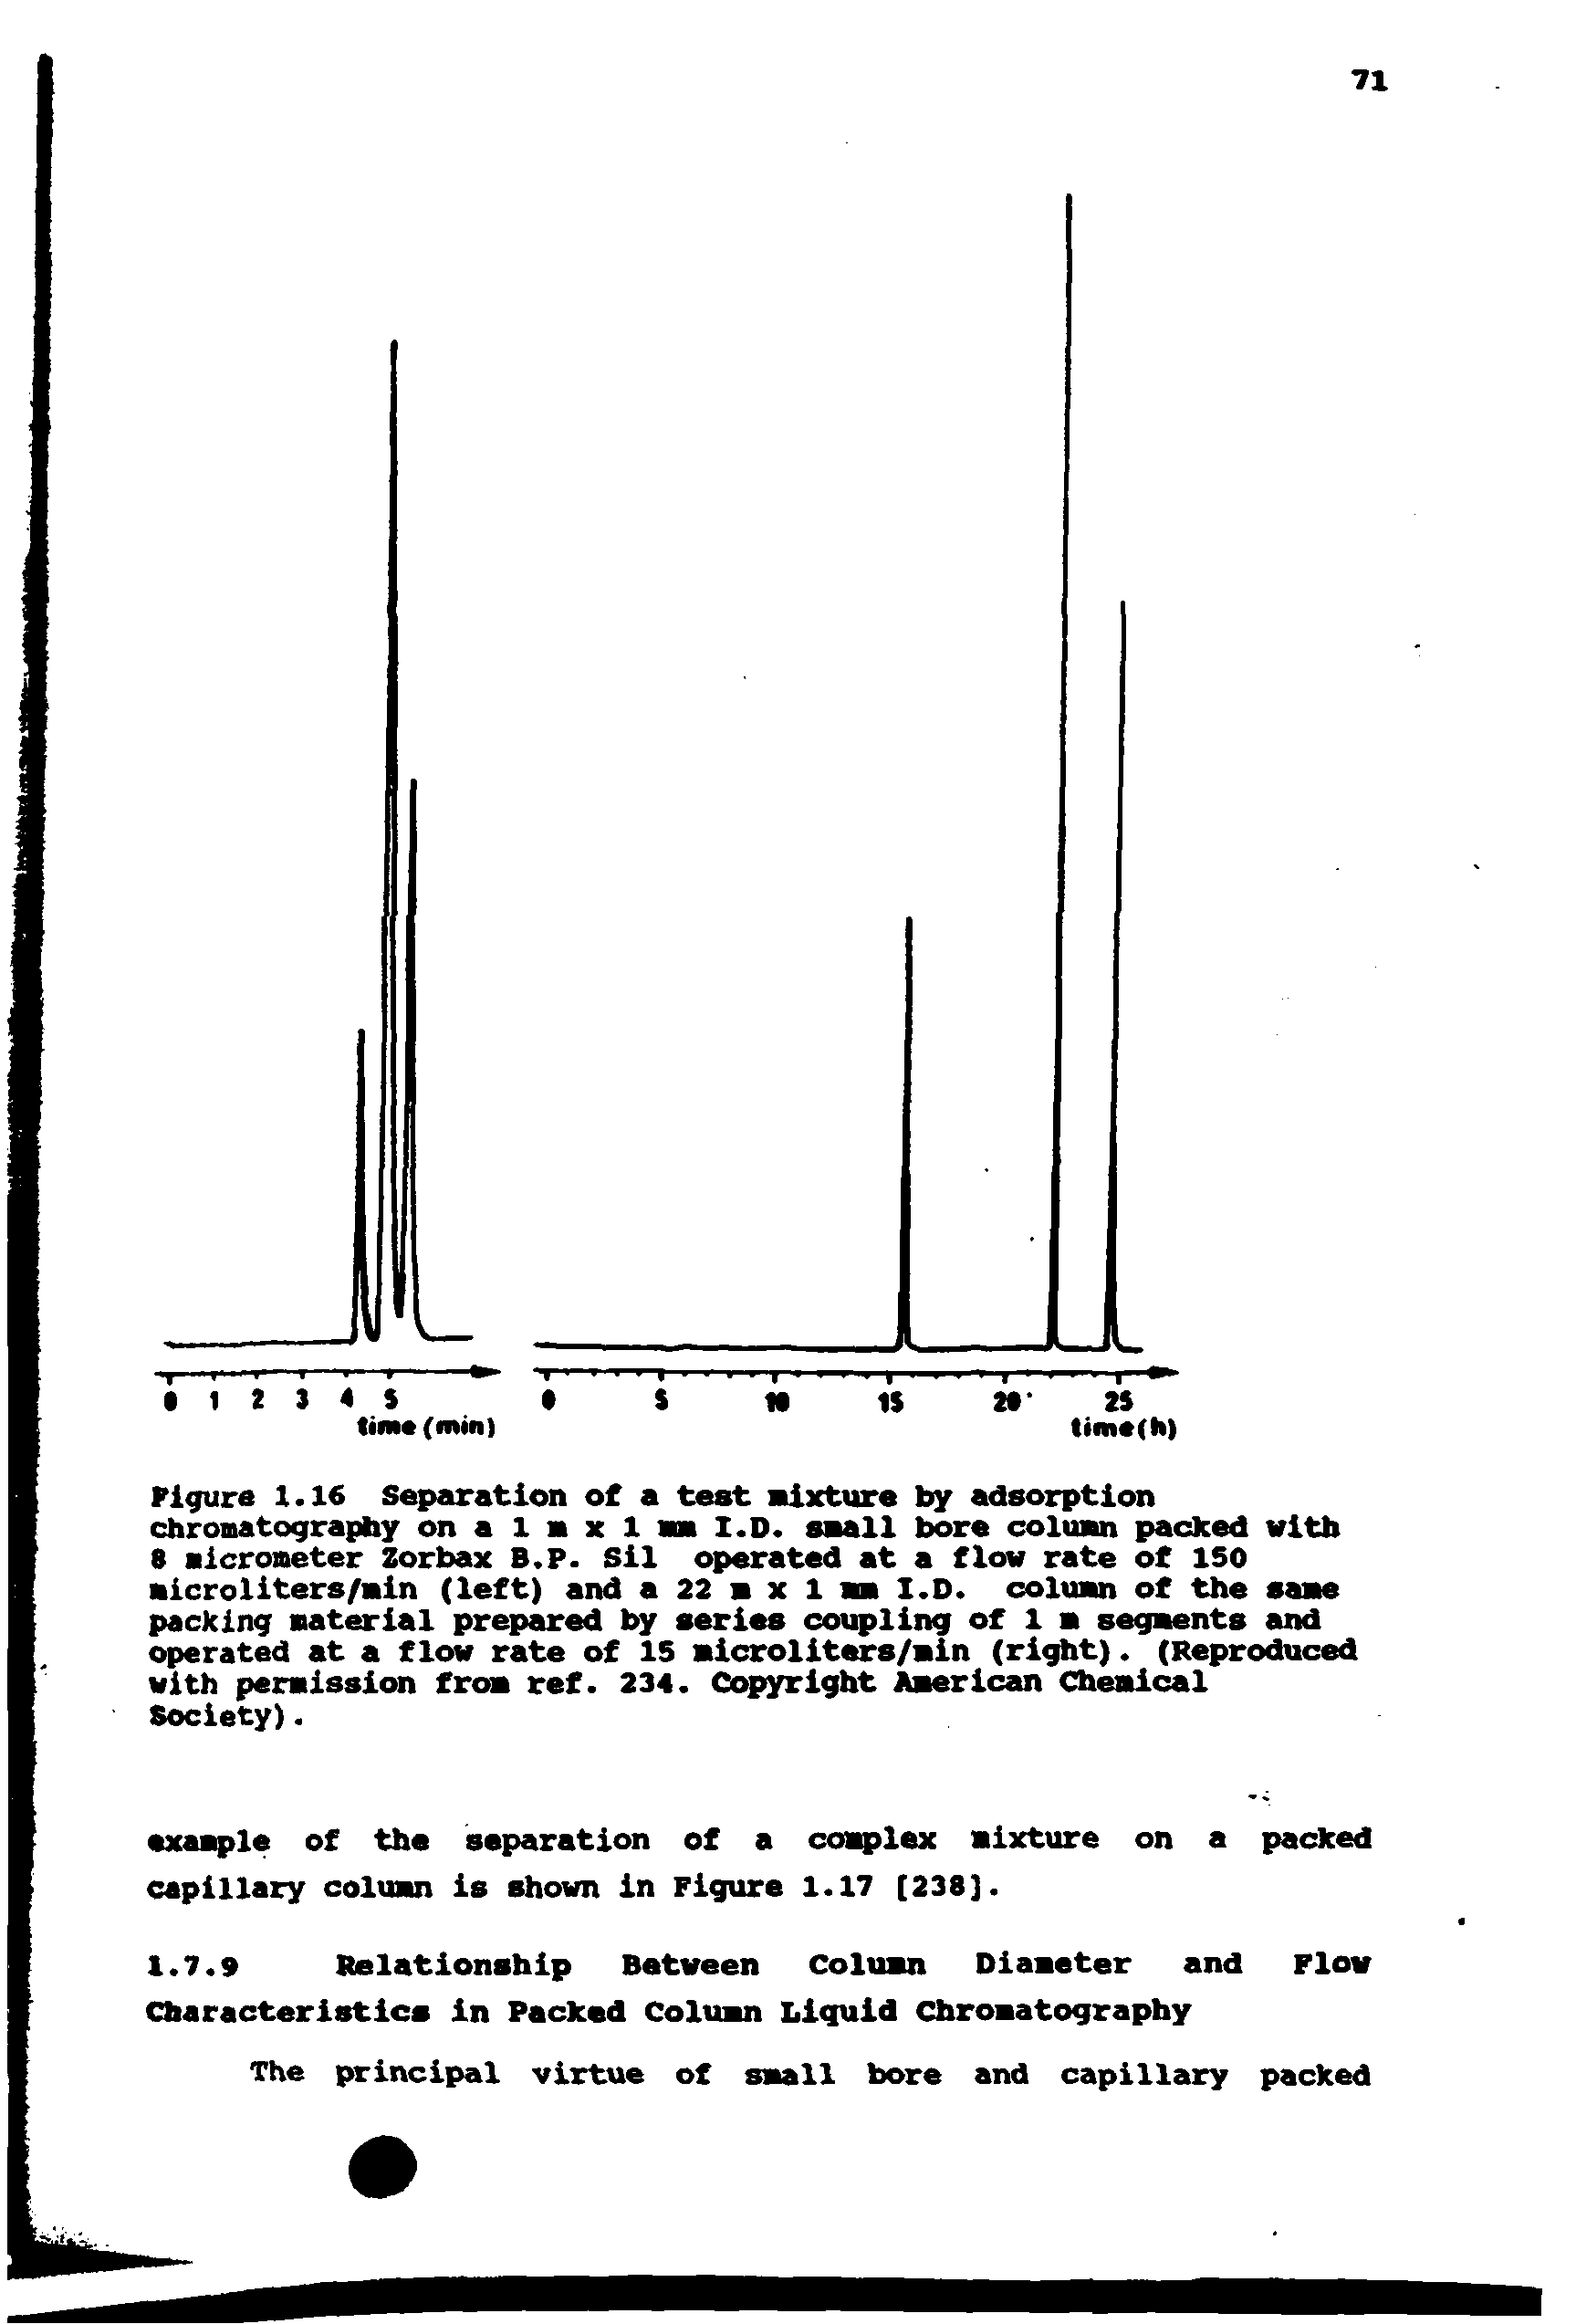 Figure 1.16 Separation ot a test mixture by adsorption chromatography on a 1 m x 1 mm I.D. small bore column packed with 8 aicrometer Zorbax B.P. Sil operated at a flow rate of ISO microliters/min (left) and a 22 m x 1 mm I.D. column of the same packing material prepared by series coupling of 1 m segments and operated at a flow rate of 15 microliters/min (right). (Reproduced with permission from ref. 234. Copyright American Chemical Society).